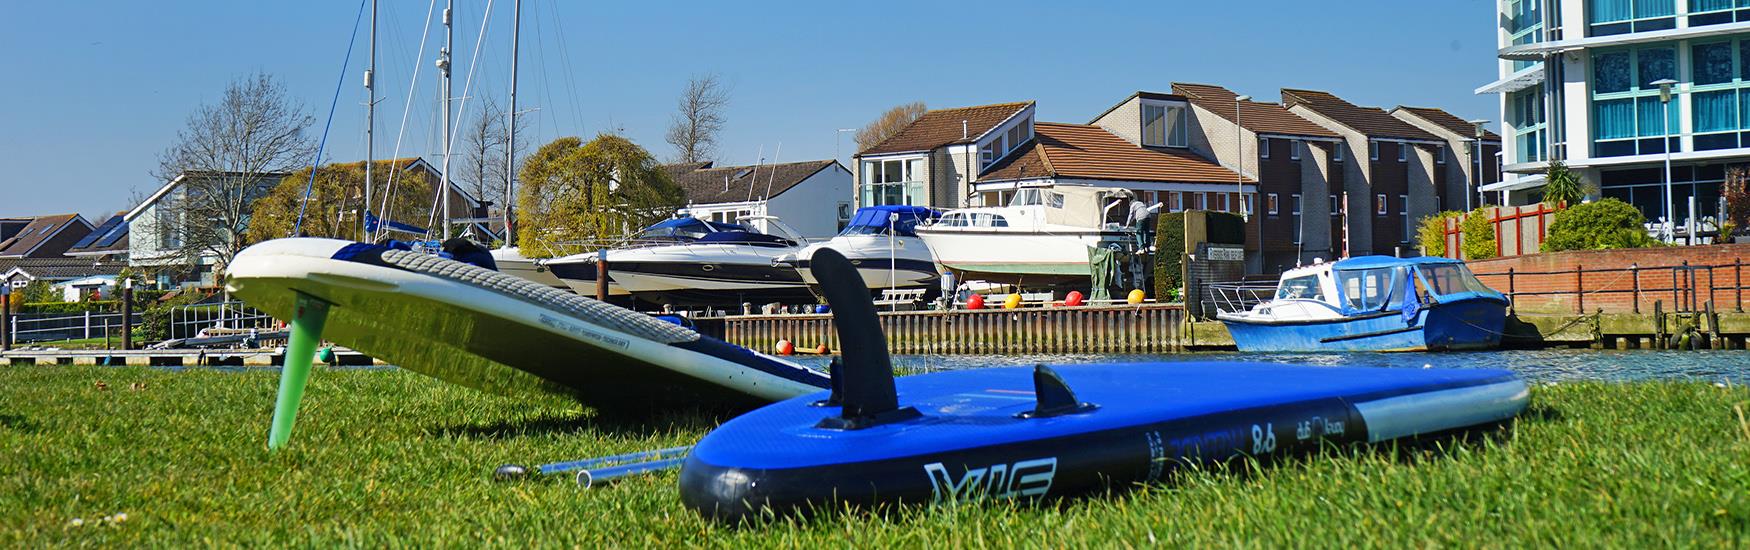 Paddleboards drying out on the grass after a trip out on the Christchurch river